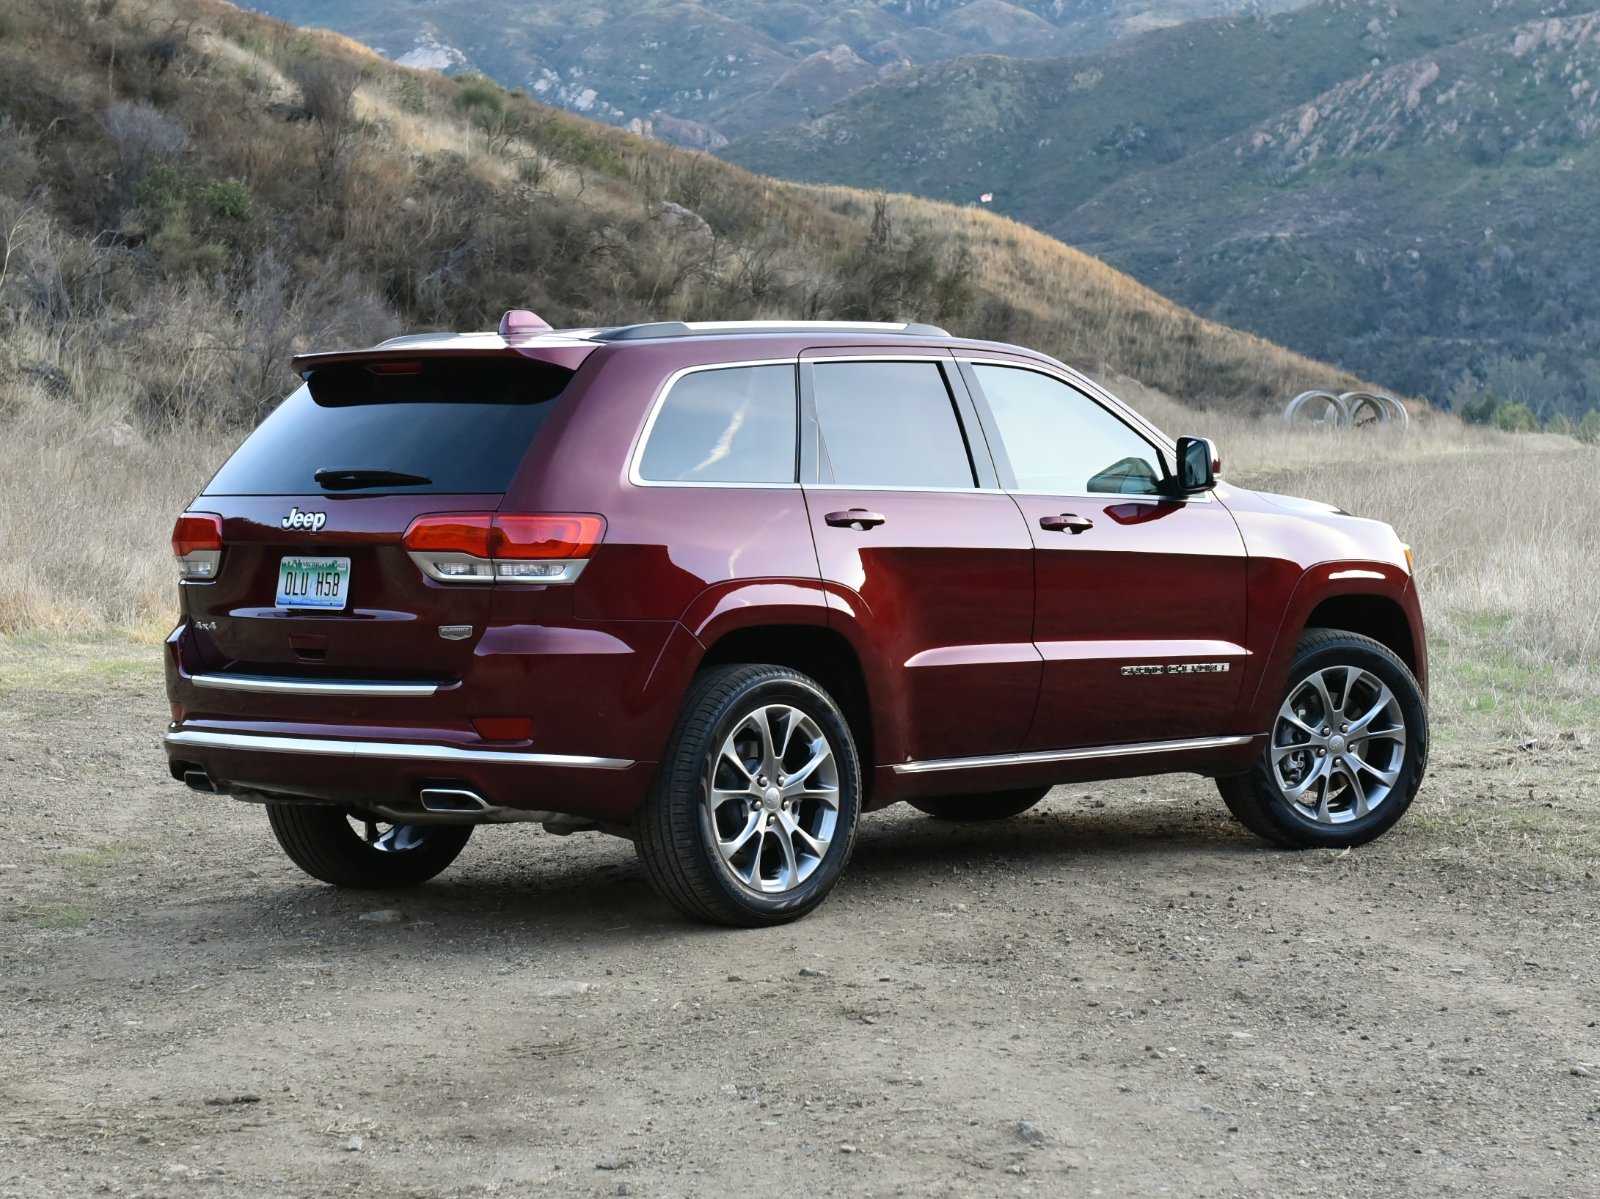 2021 Jeep Grand Cherokee Test Drive Review costEffectivenessImage